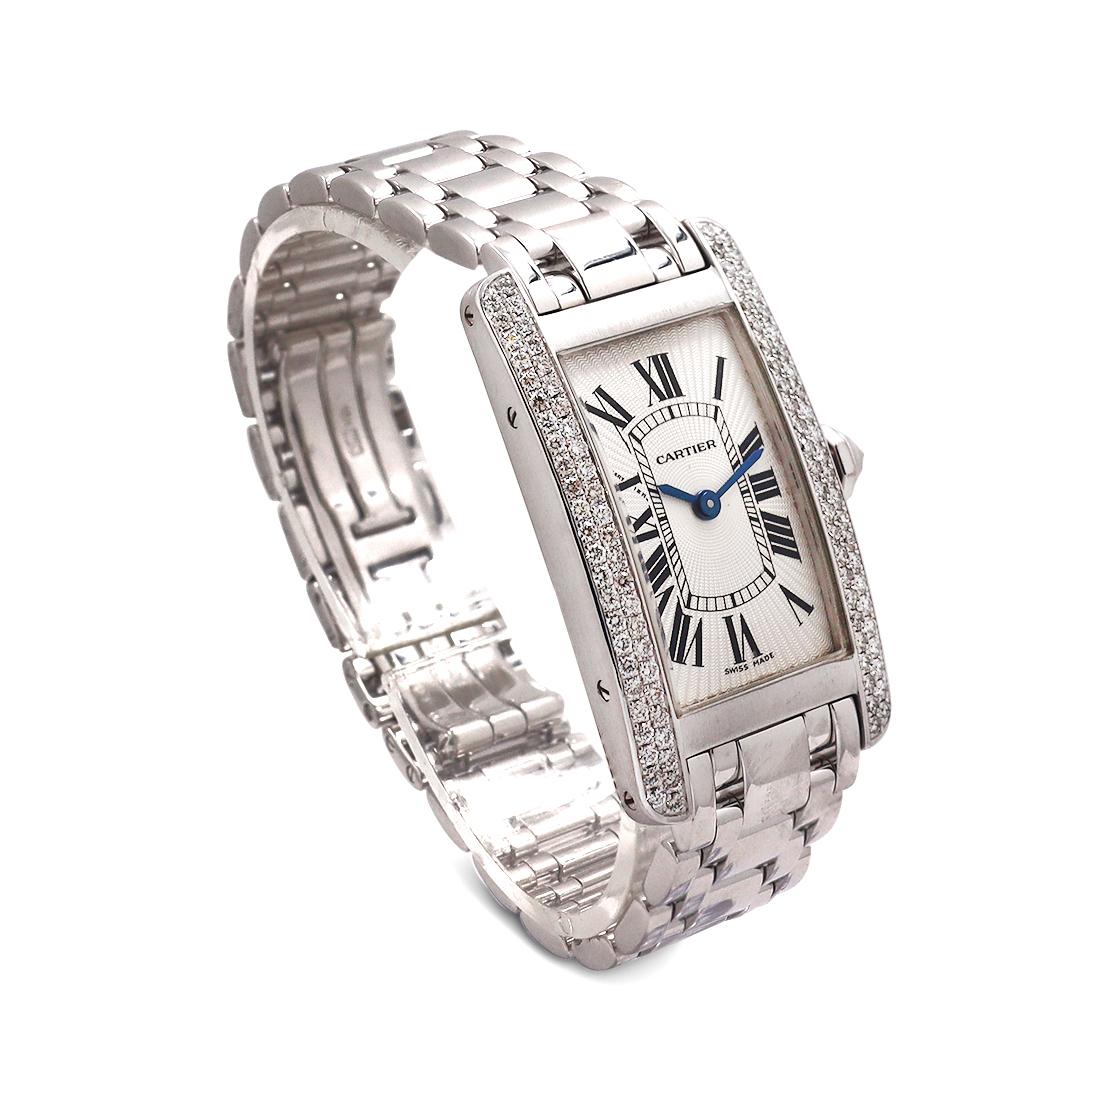 Authentic Cartier Tank Ameriçaine watch crafted in 18 karat white gold.  34.8mm x 19mm case with diamond bezel and diamond crown, Swiss Quartz movement, silver guilloche dial, blue steel sword-shaped hands, and 18 karat white gold bracelet.  Wrist